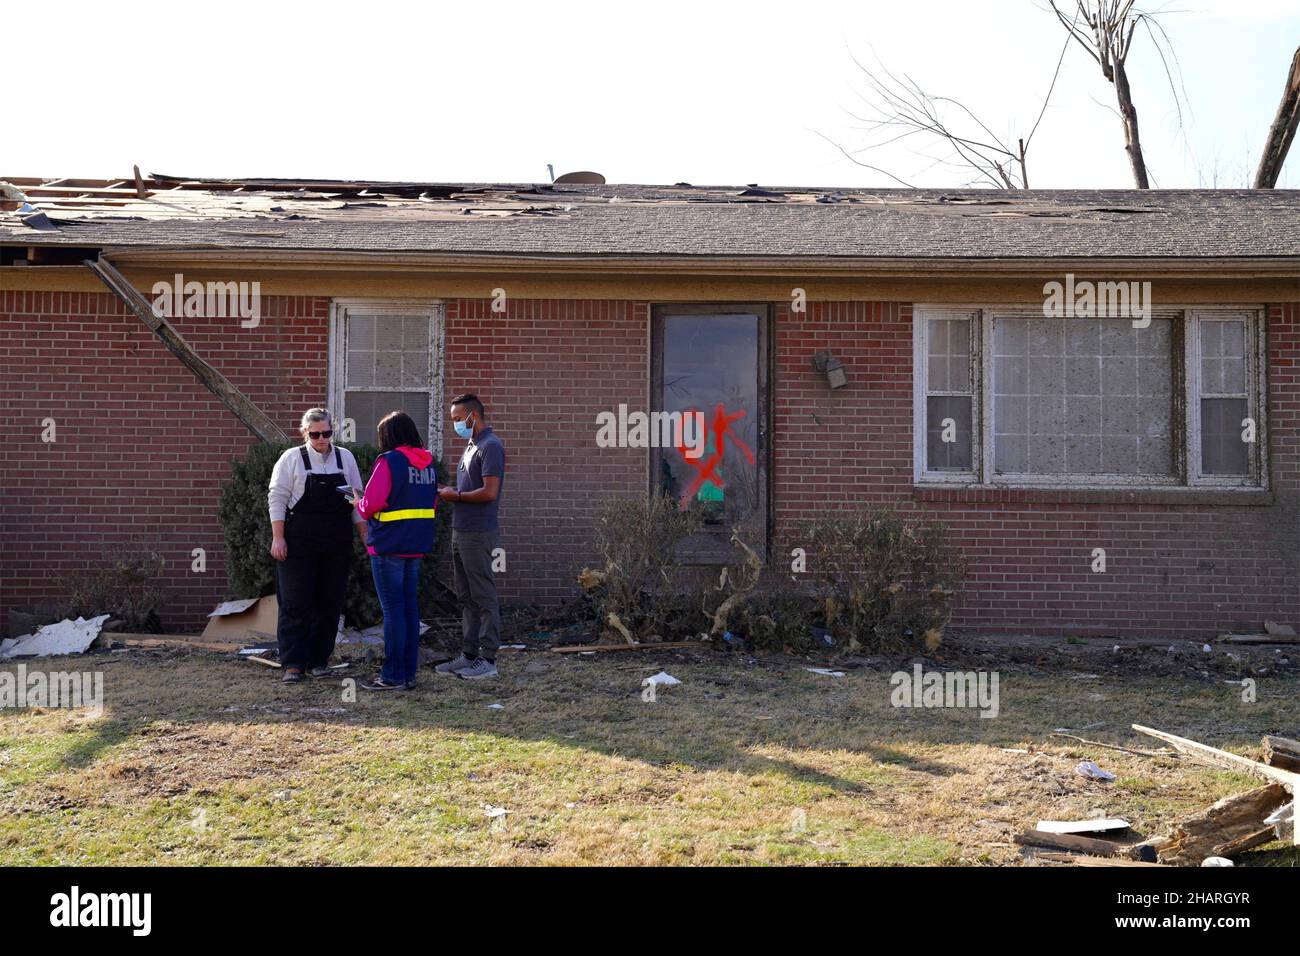 Dawson Springs, United States of America. 14 December, 2021. FEMA Disaster Survivors Assistance teams work with residents to provide assistance in the aftermath of devastating tornadoes that swept across four states destroying structures and killing dozens December 14, 2021 in Dawson Springs, Kentucky. Credit: Dominick Del Vecchio/FEMA/Alamy Live News Stock Photo